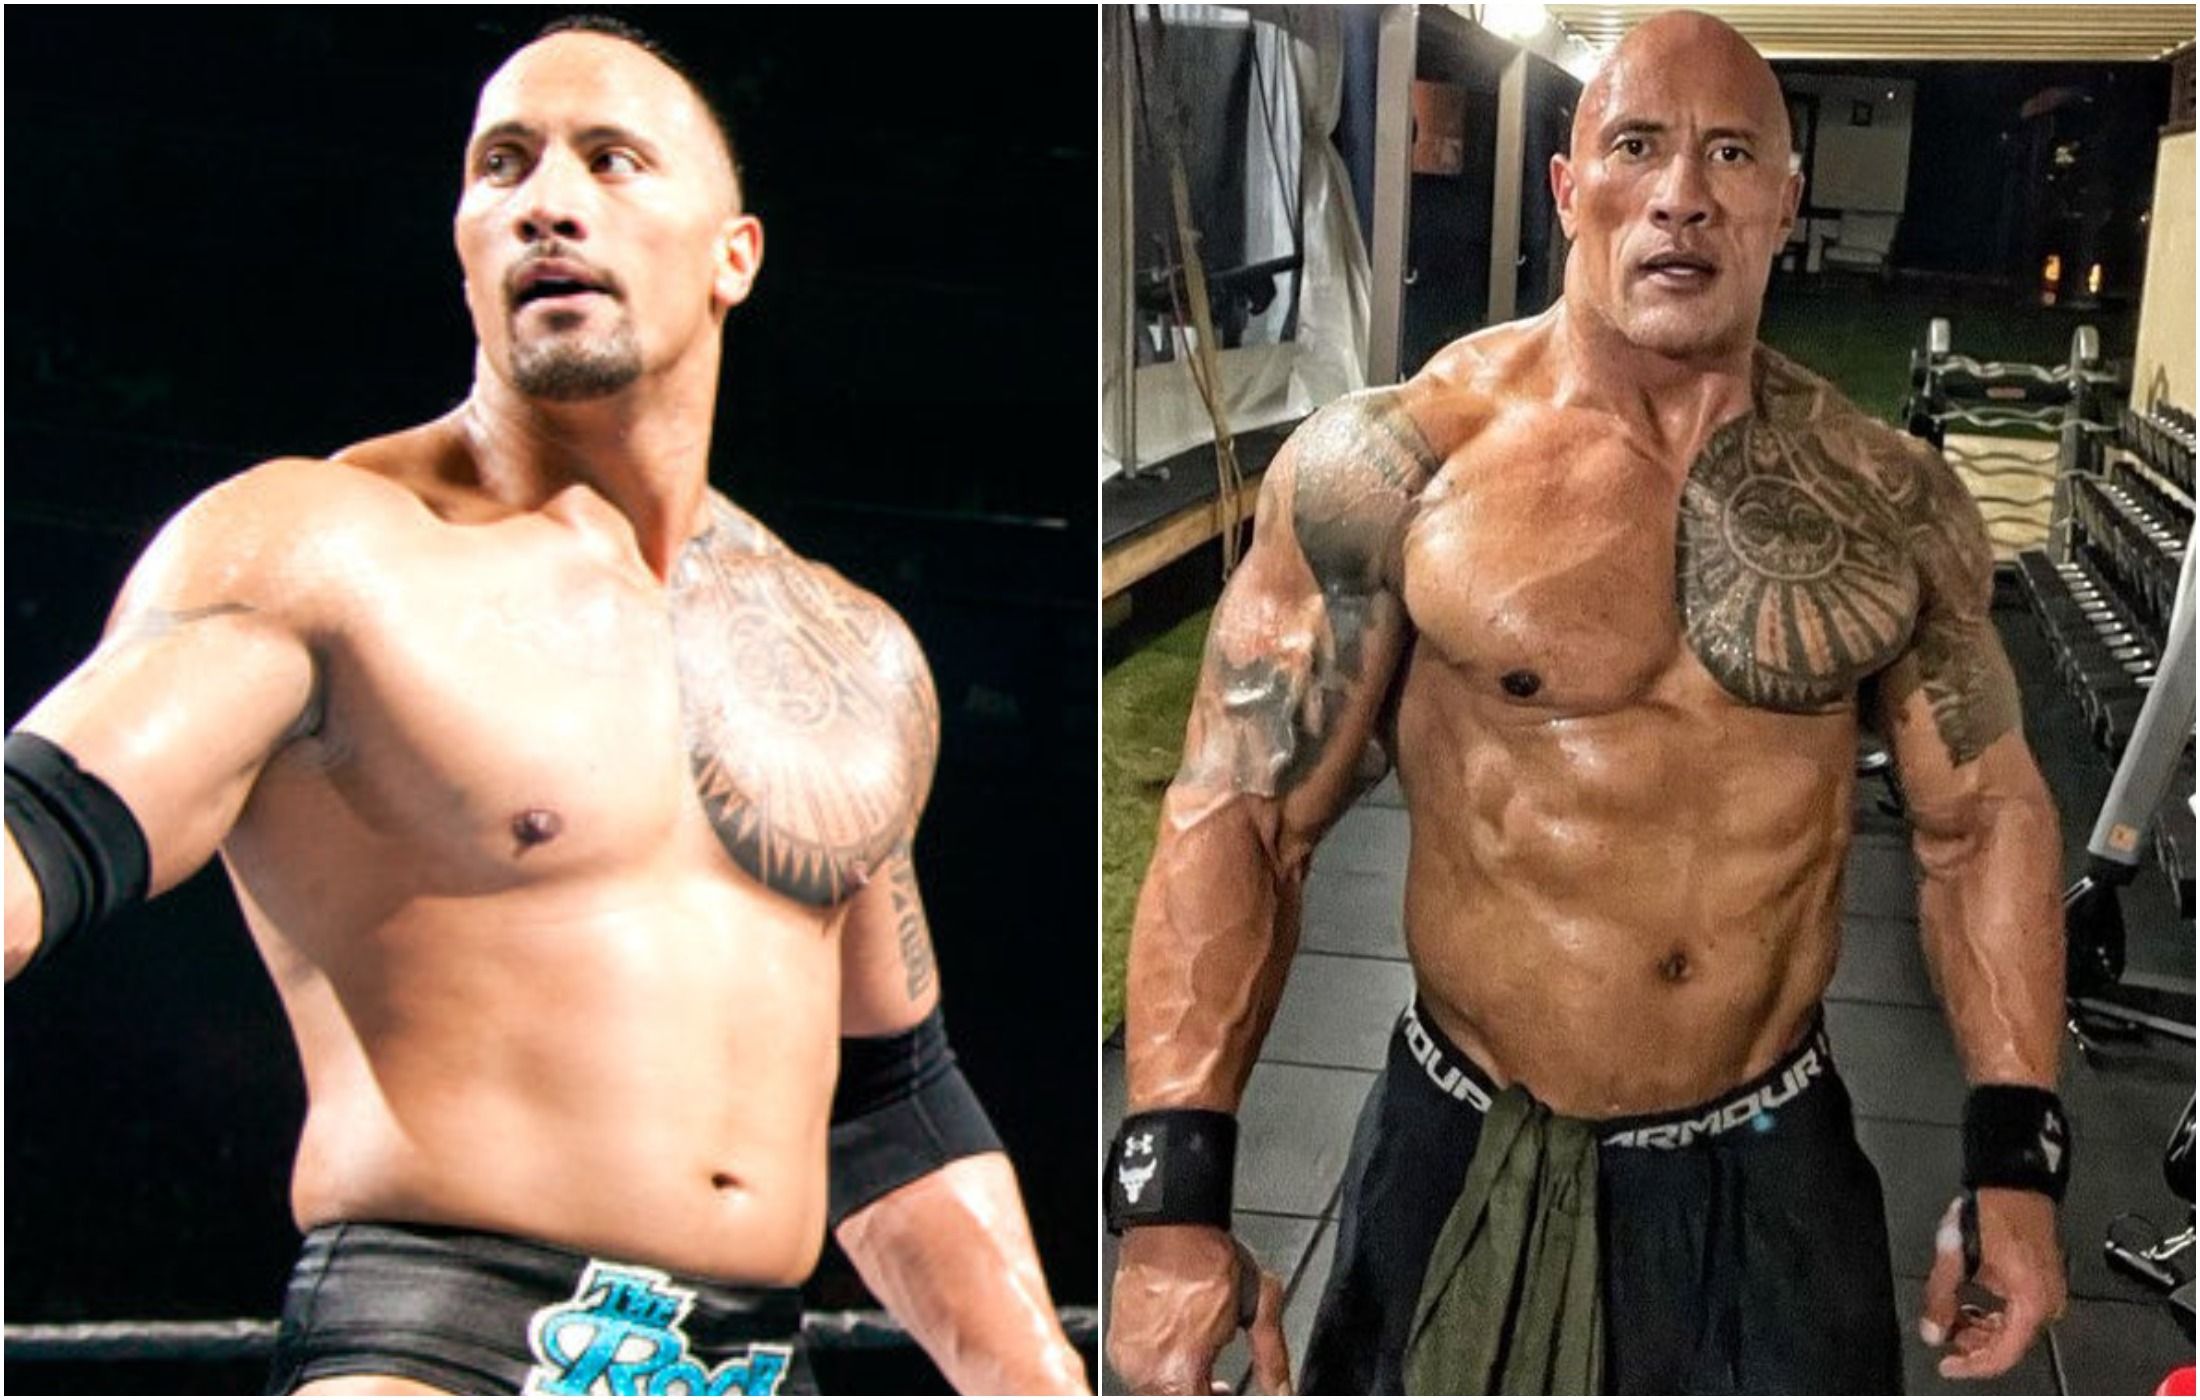 The Rock is, without doubt, now in the best shape of his life